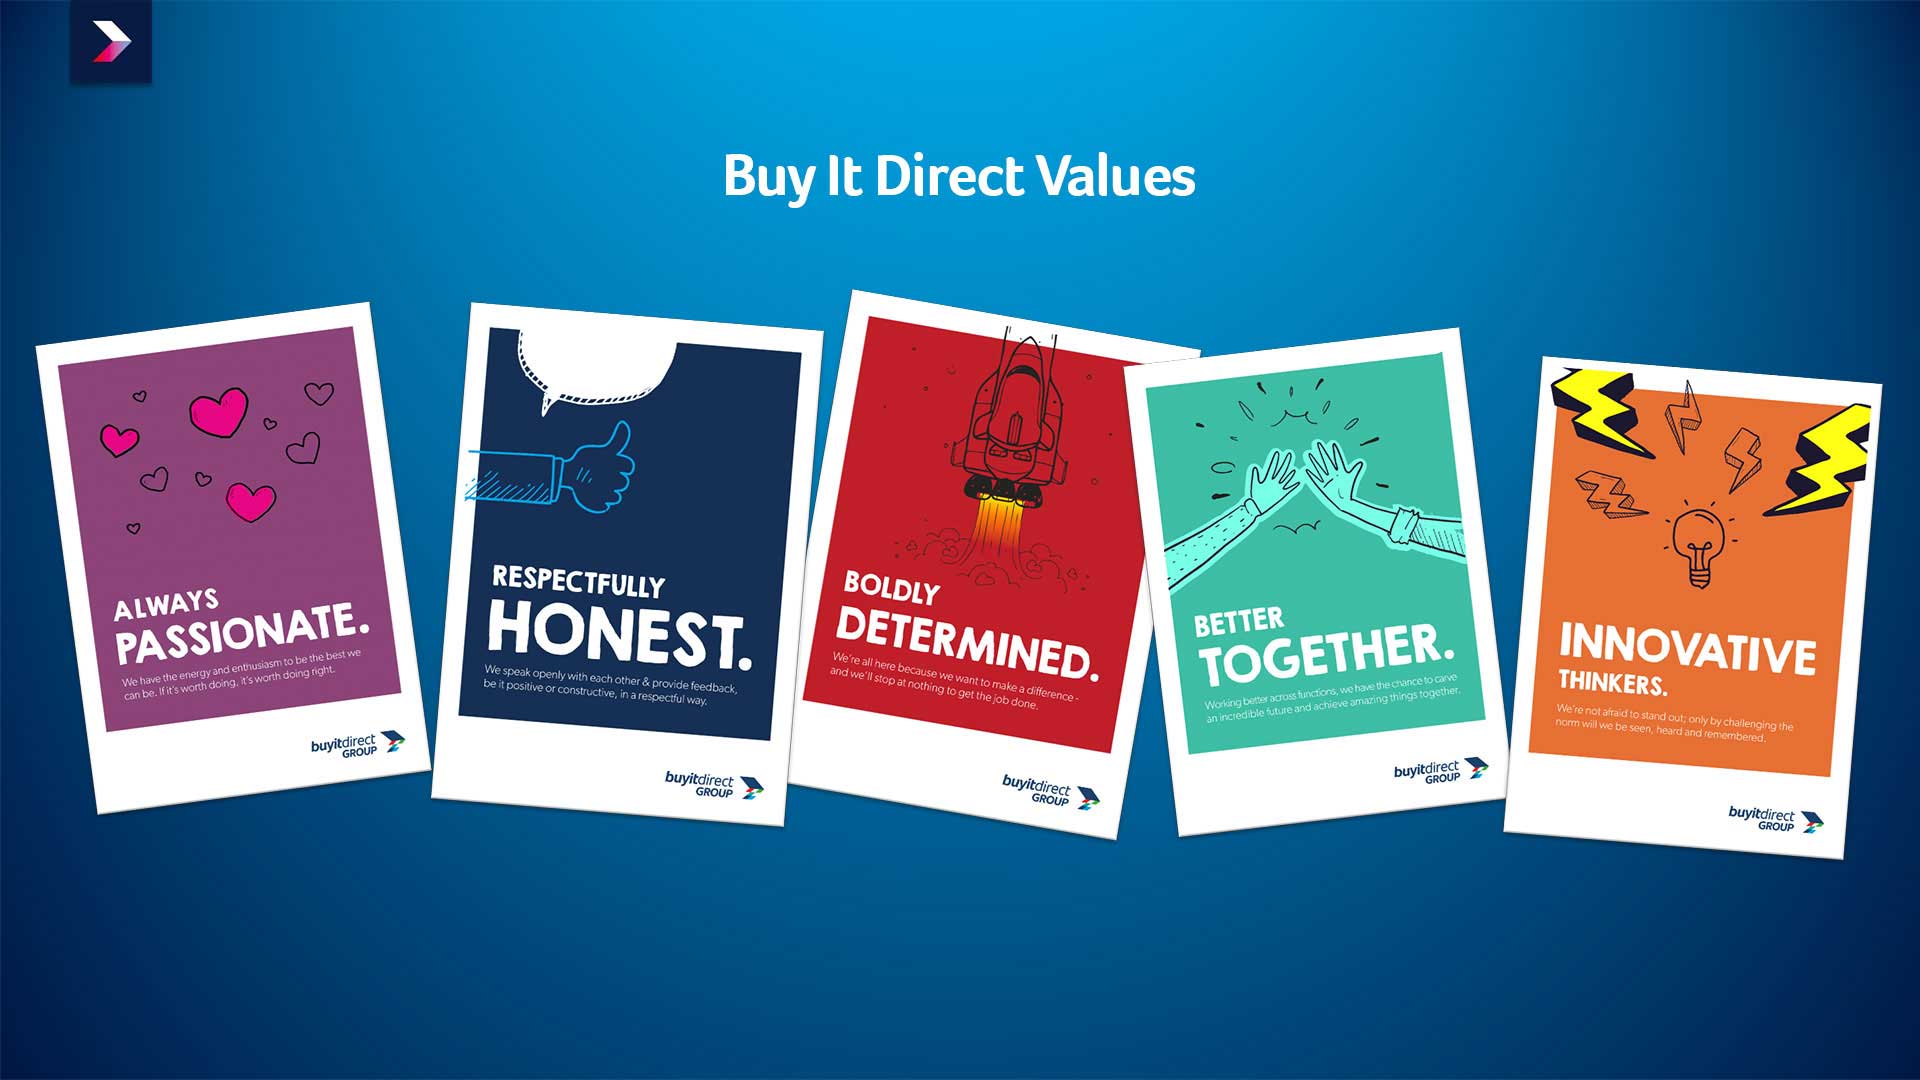 A visual of the principle values that underpin Buy It Direct: Boldly Determined, Better Together, Respectfully Honest, Innovative Thinkers, Always Passionate